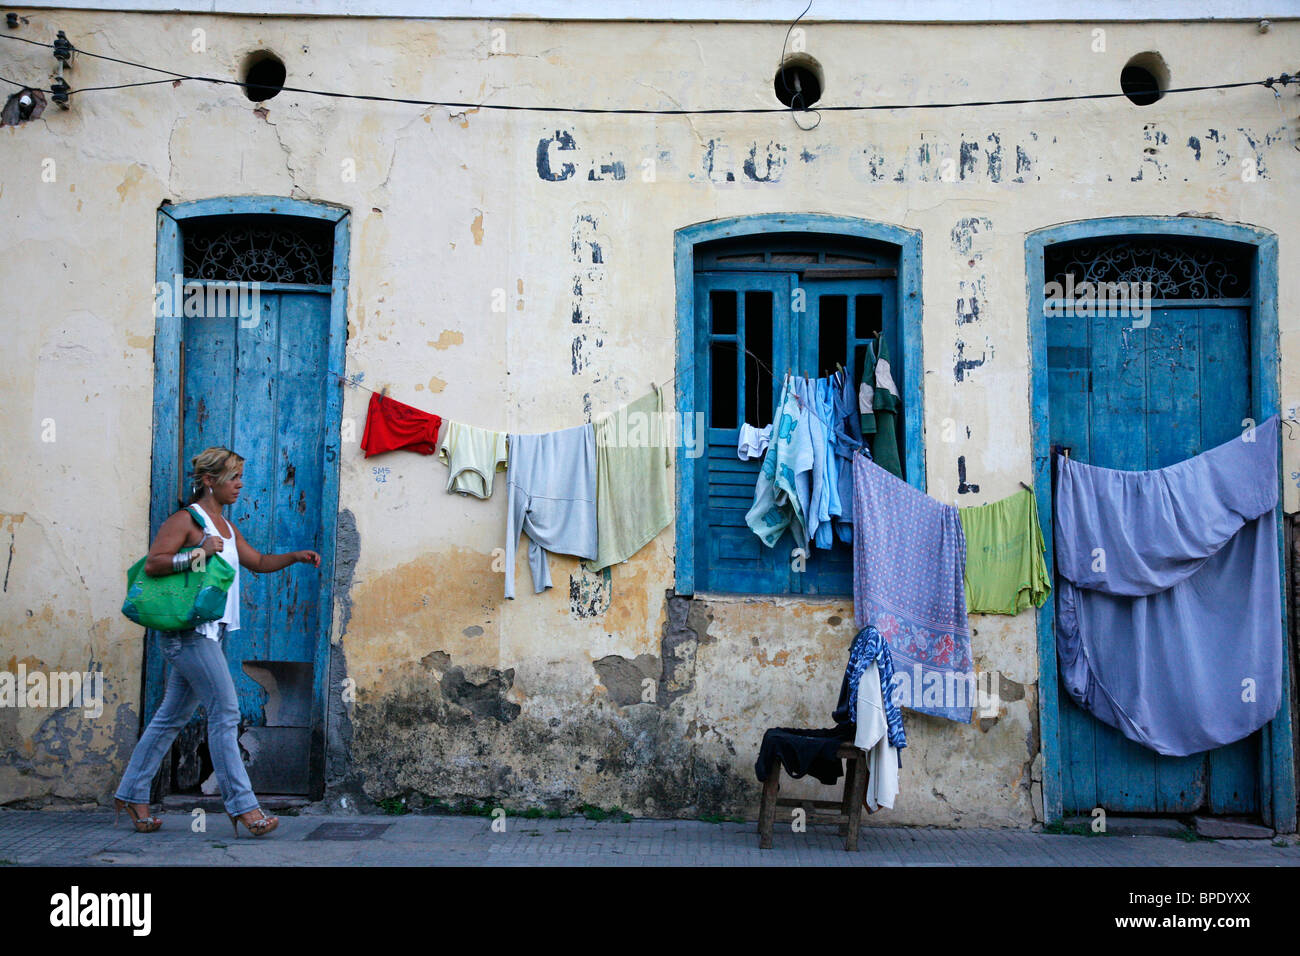 Woman walking by an old building with laundry hanging in, Cachoeira, Bahia, Brazil. Stock Photo